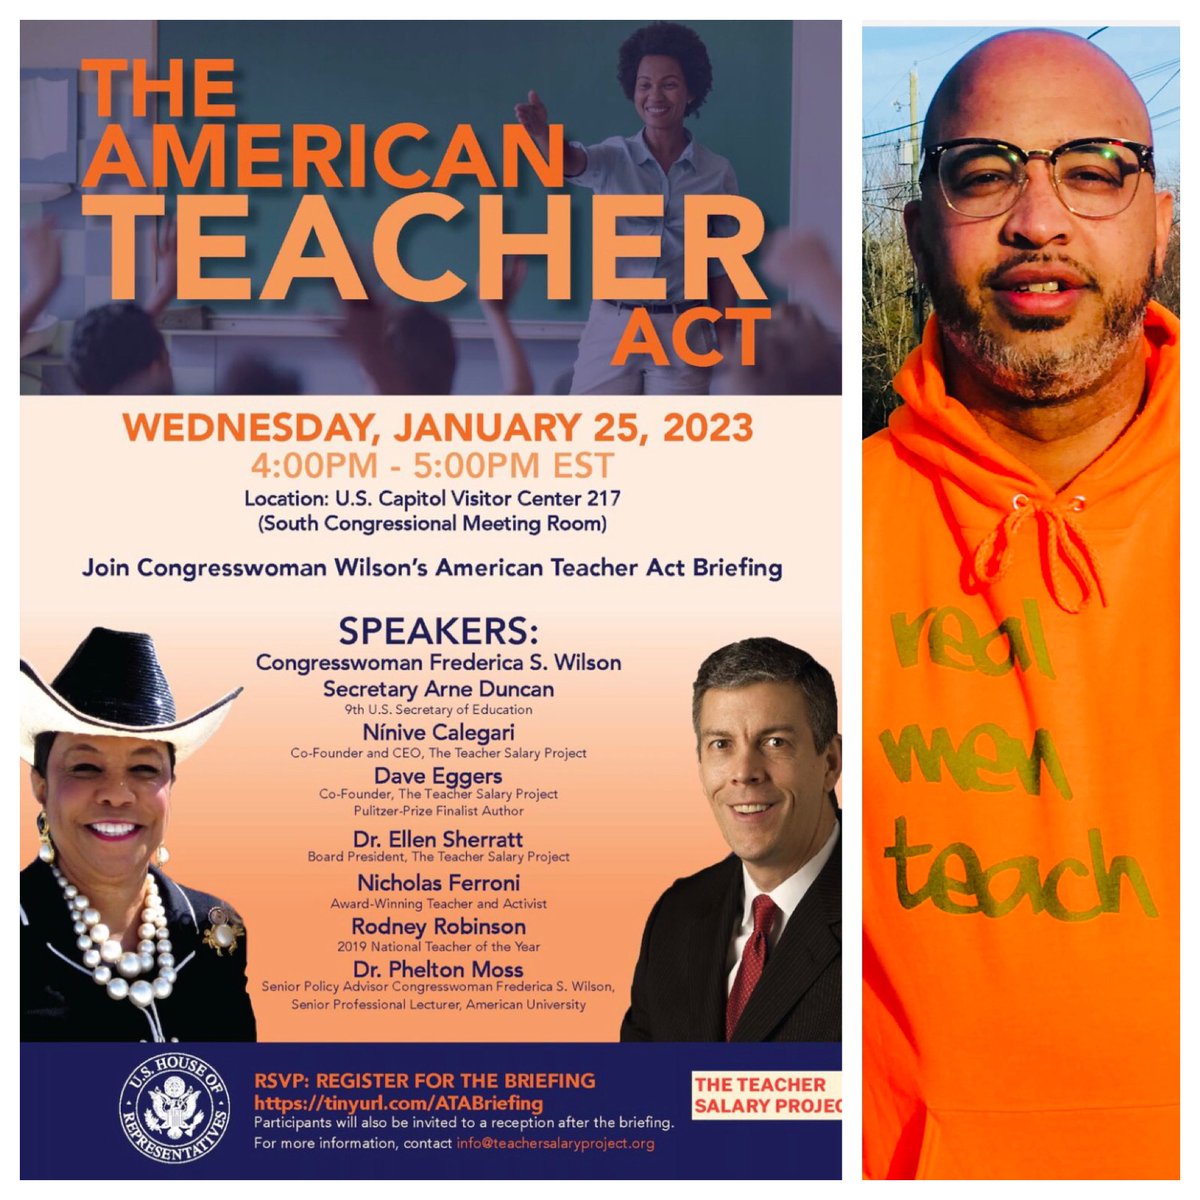 Real Men Teach supports @teachersalary Project, @RepWilson, and #AmericanTeacherAct!

Join us Wed. at 4pm at U.S. Capitol to demand Congress increase teacher starting salaries to $60k like my state of Maryland has done! @arneduncan 

Register here: tinyurl.com/ATABriefing